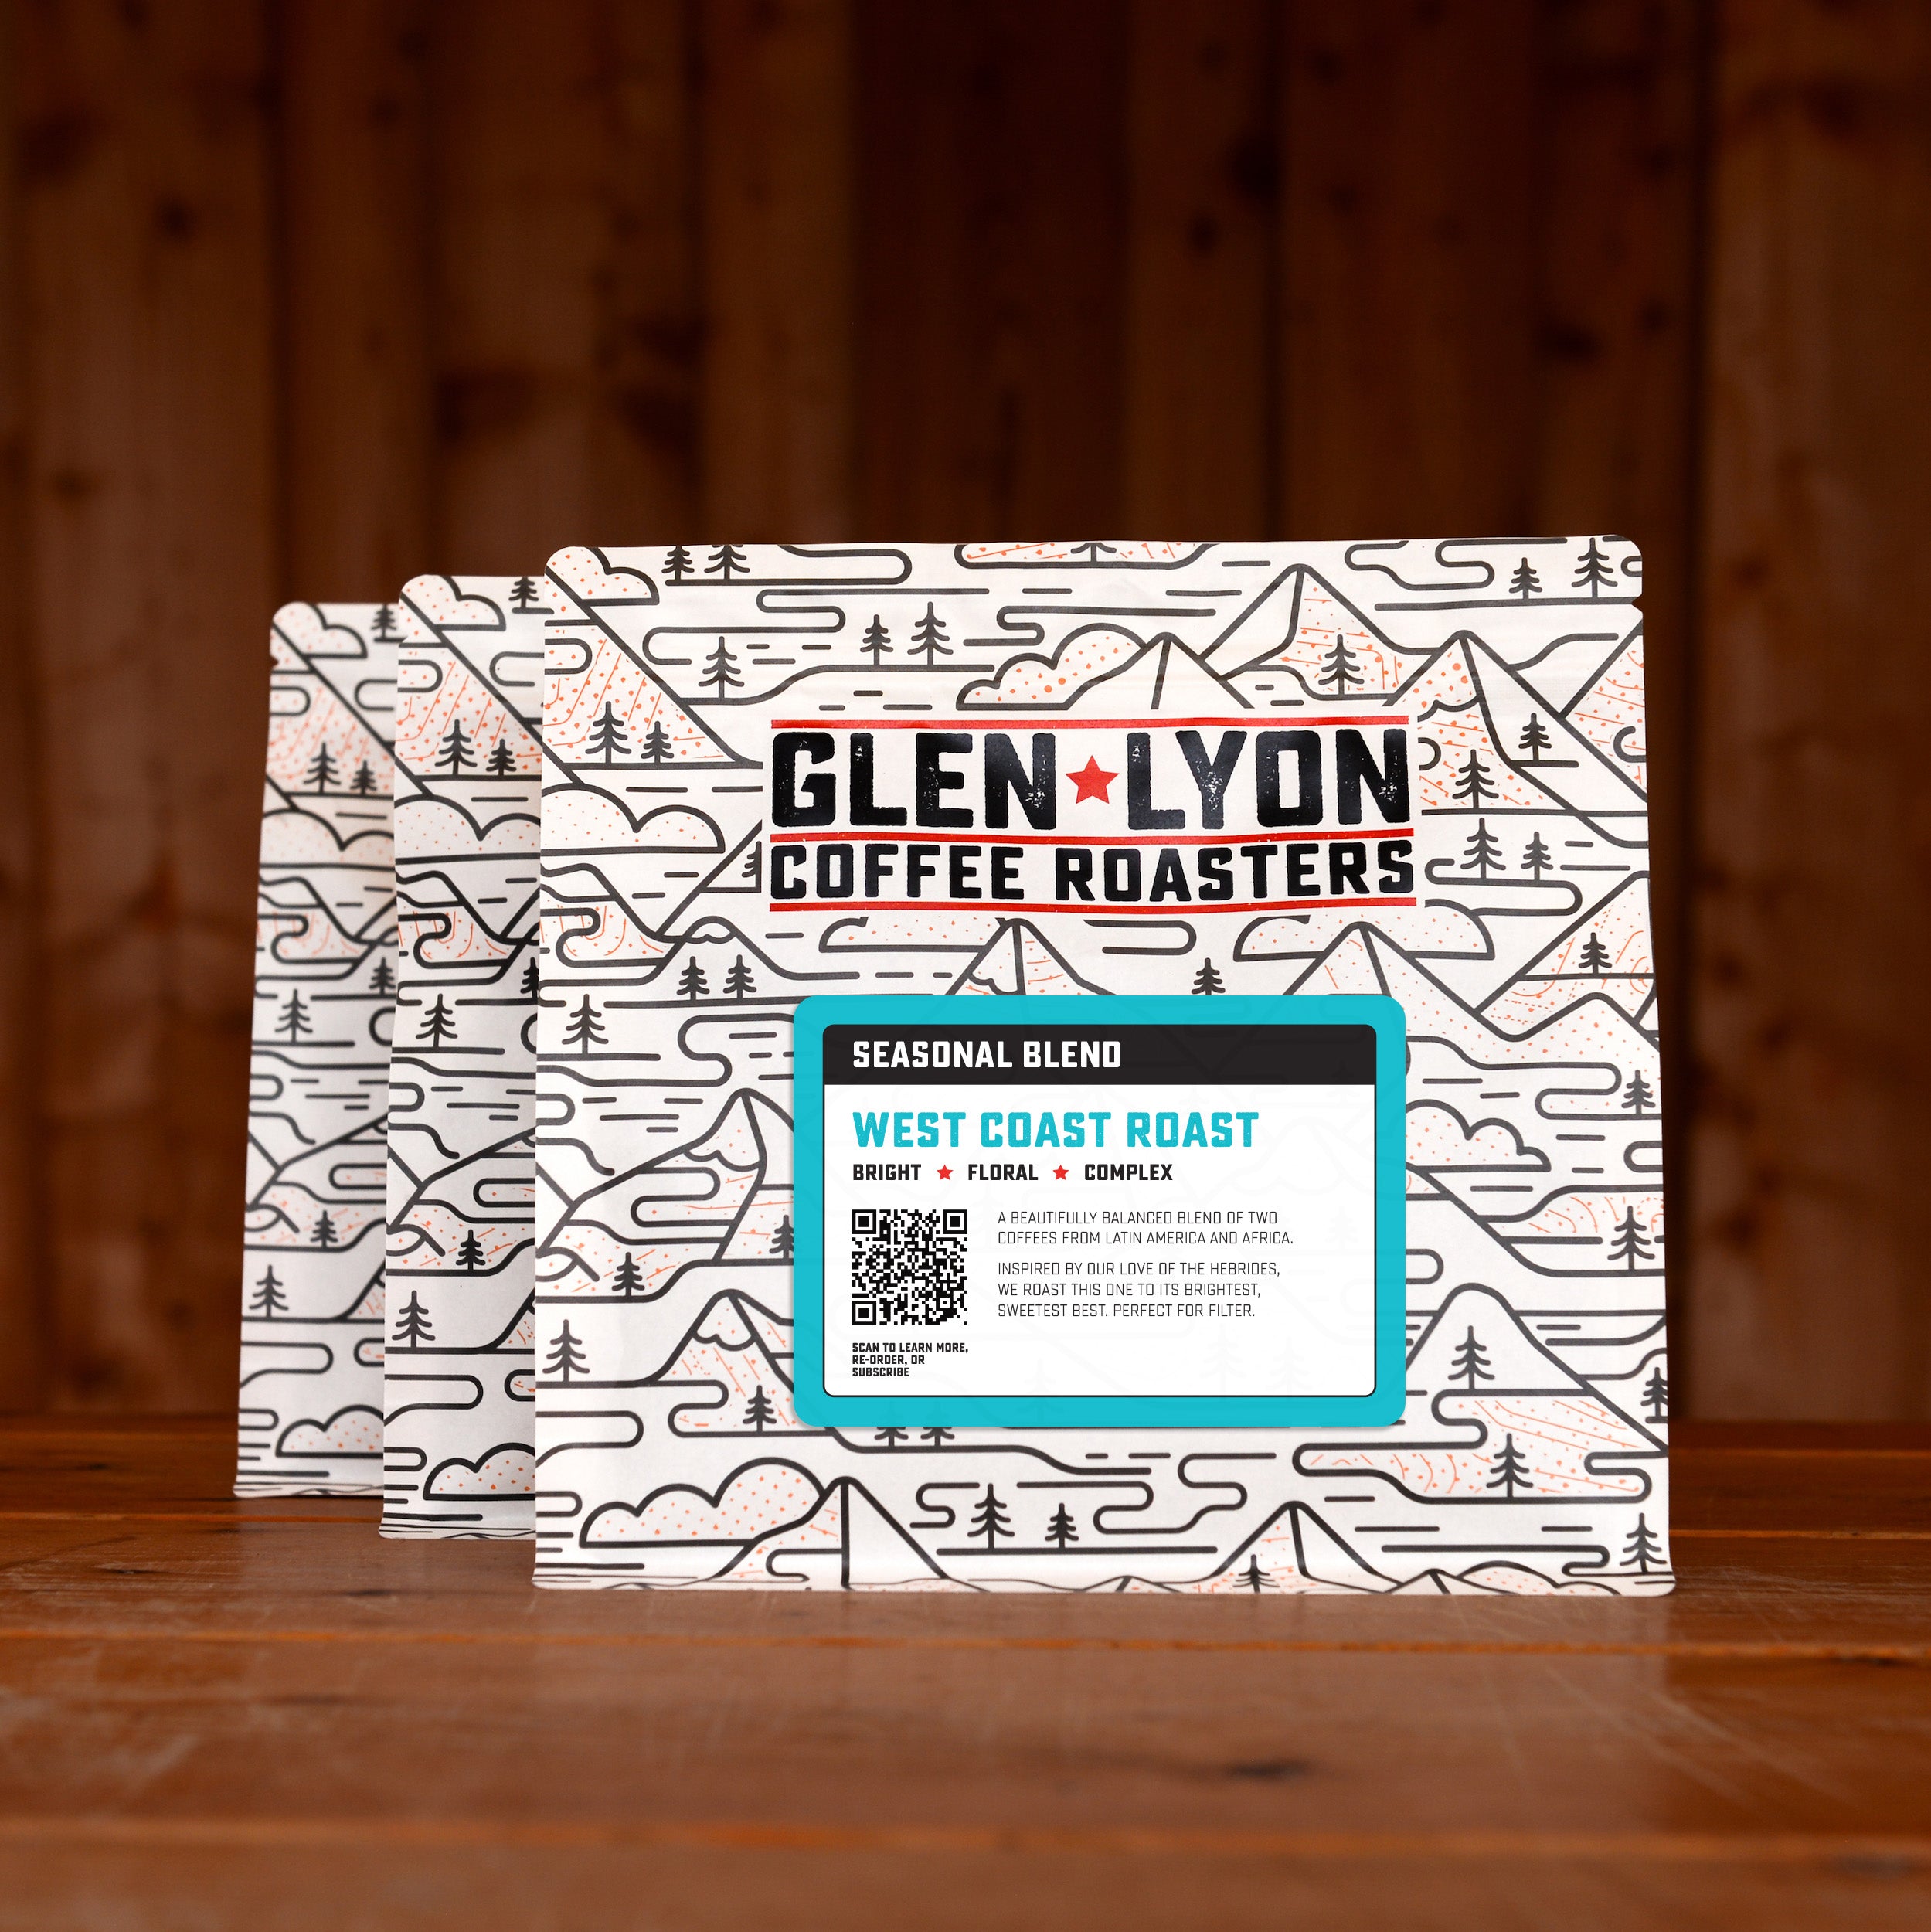 3 bags of West Coast Roast subscription labelled speciality coffee from Glen Lyon Coffee Roasters against a warm wood-tinged background